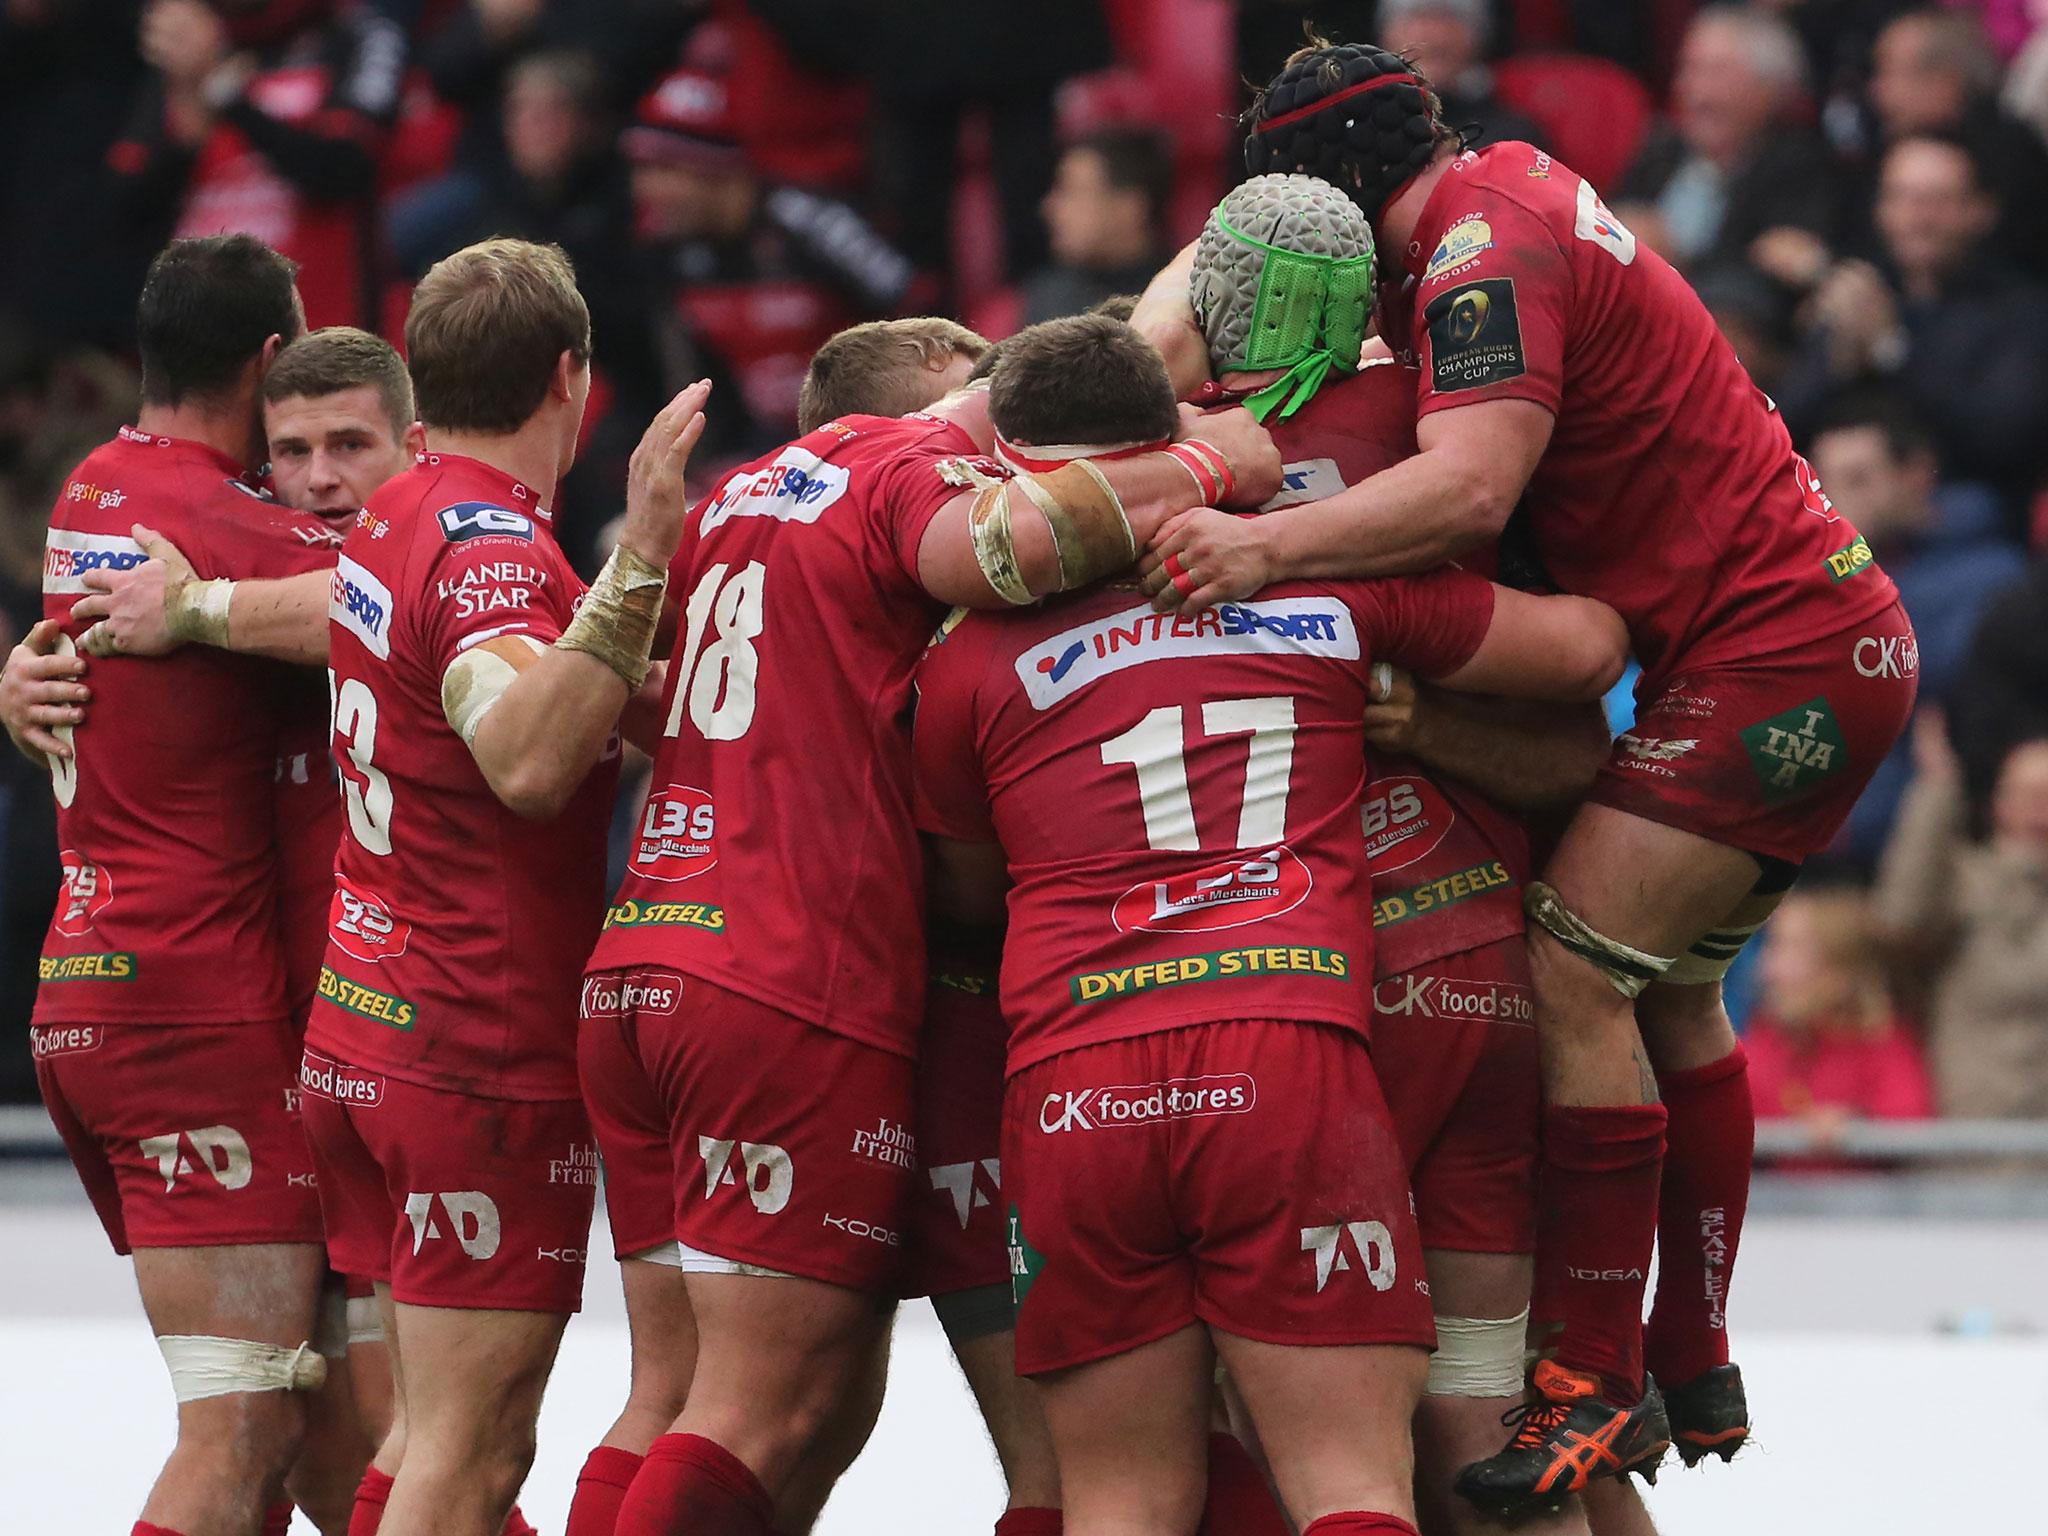 &#13;
Scarlets face three-time European champions Toulon on Sunday &#13;